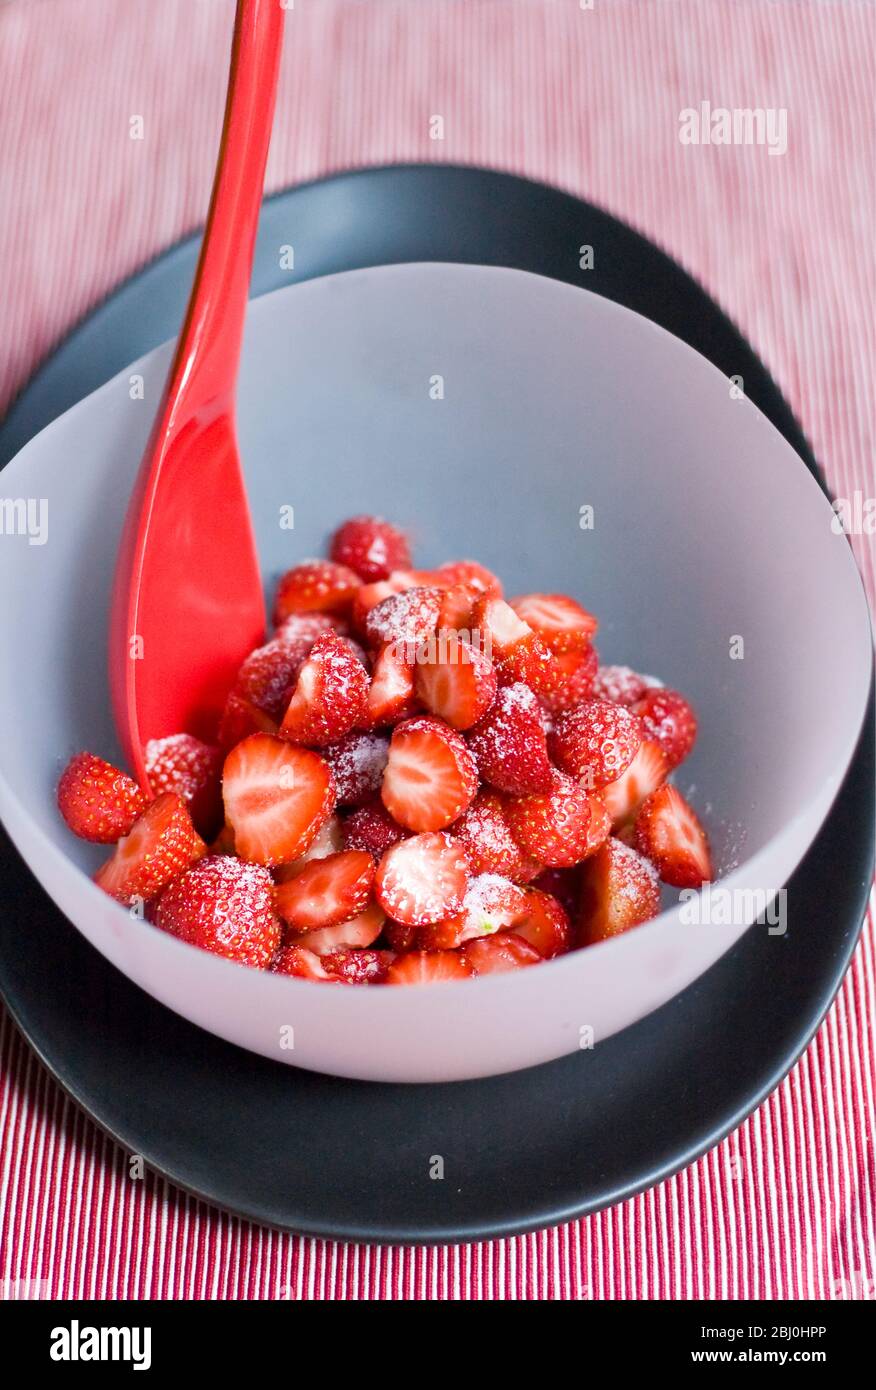 Strawberries, hulled and halved, dusted with caster sugar, served in frosted glass bowl on black plate with bright red melamine spoon. - Stock Photo